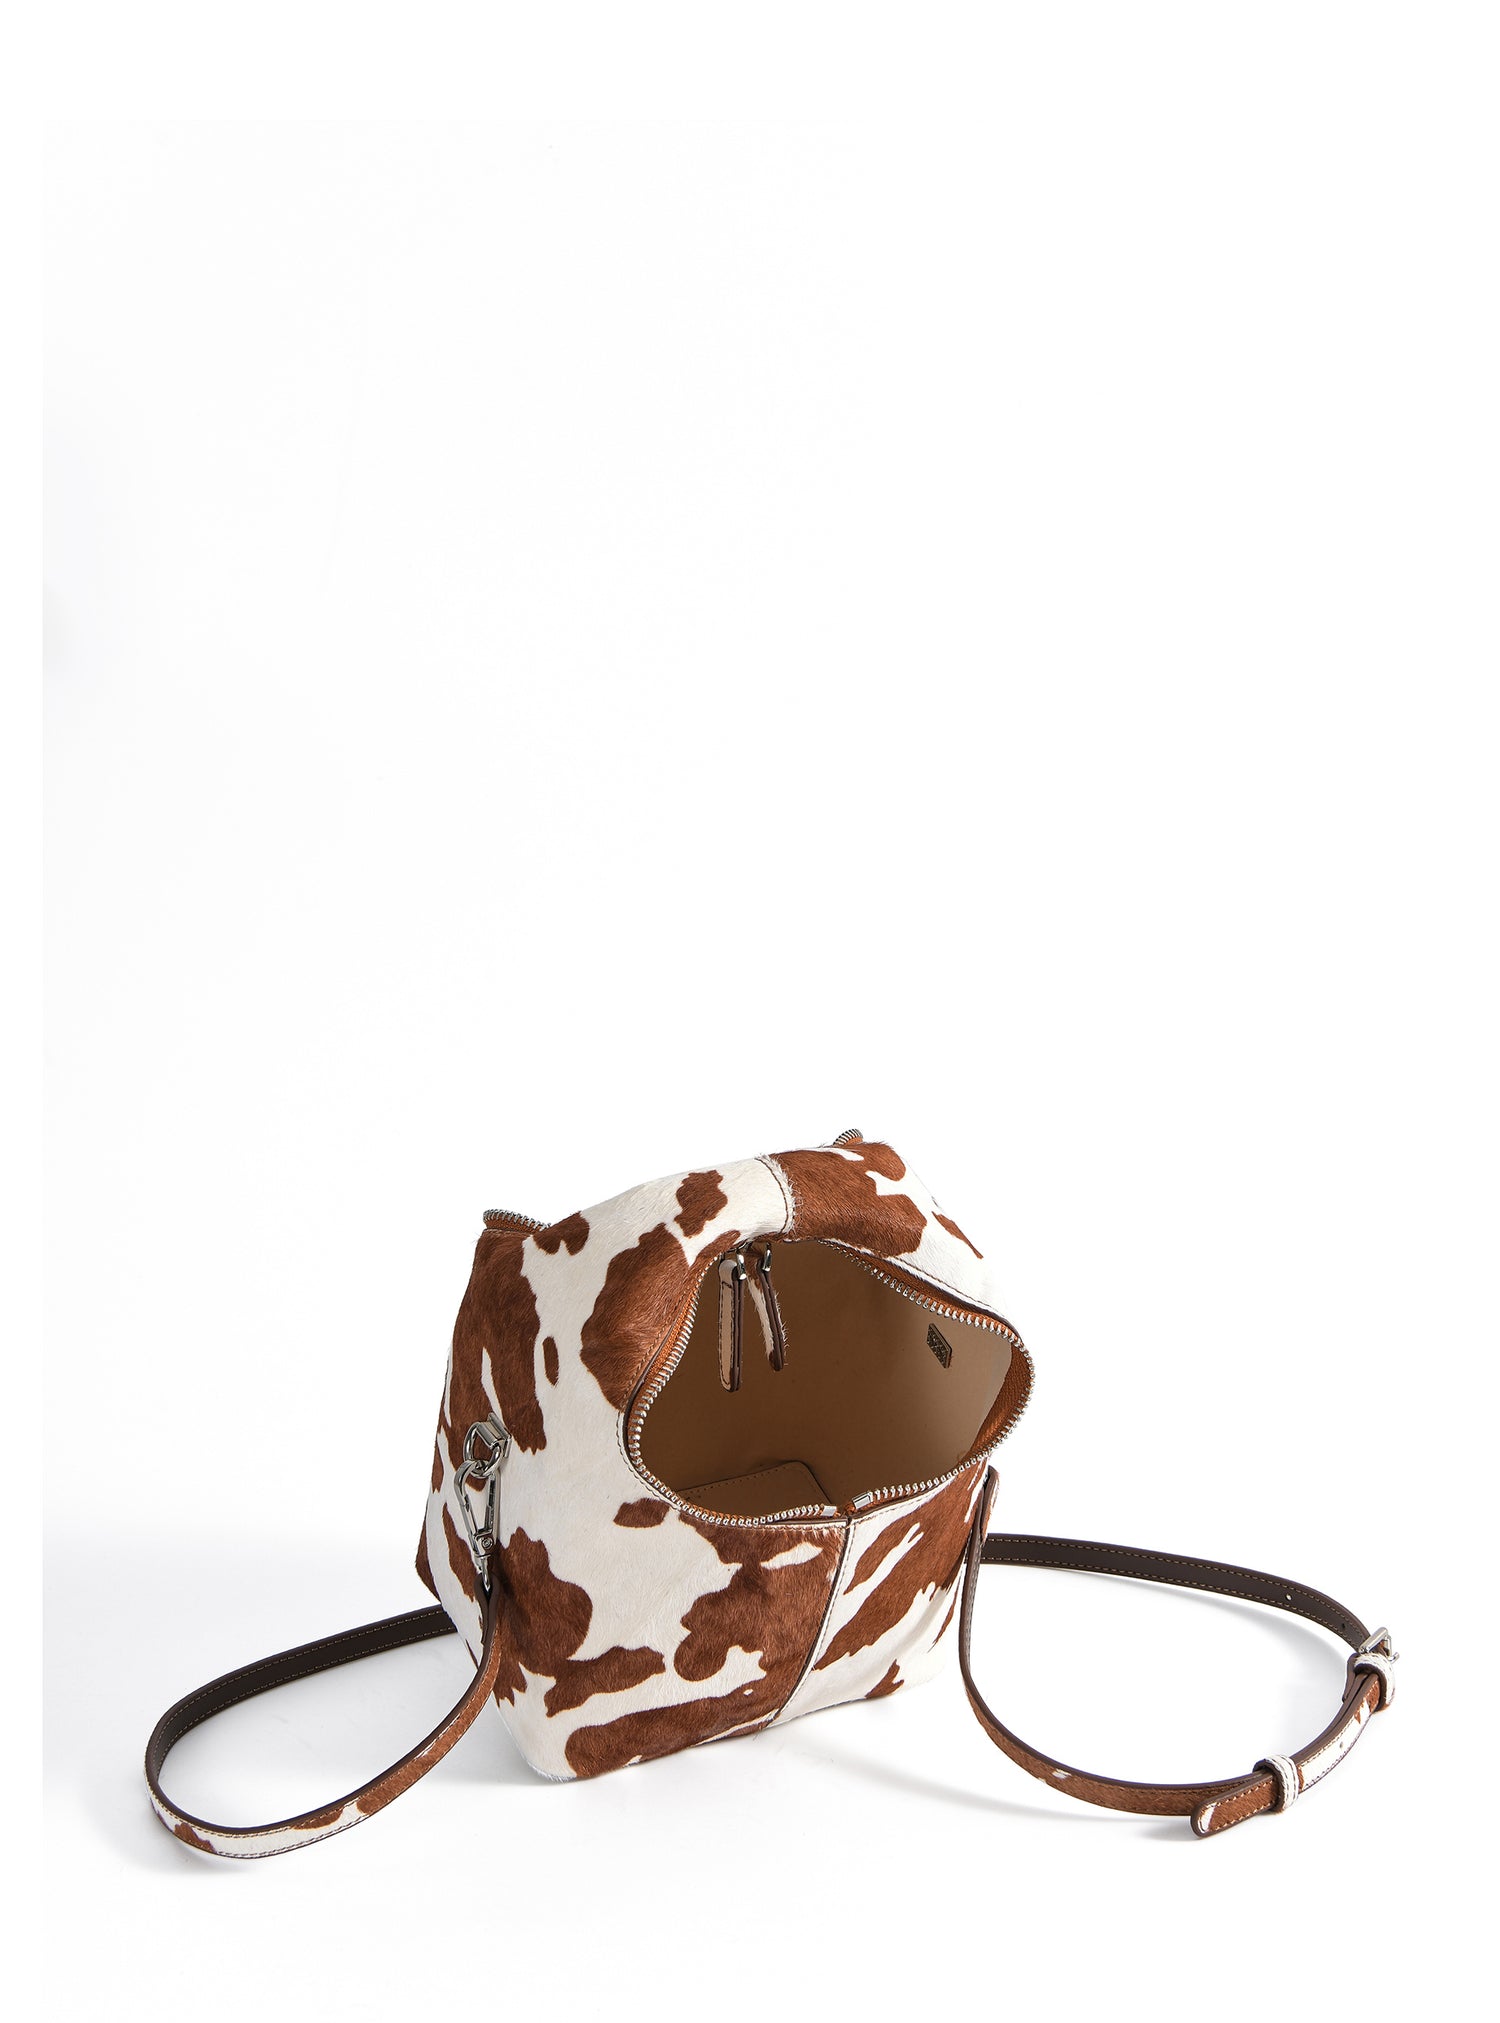 Danielle Nicole Tangled Wanted Cylinder Cross Body Bag | The Geek Side